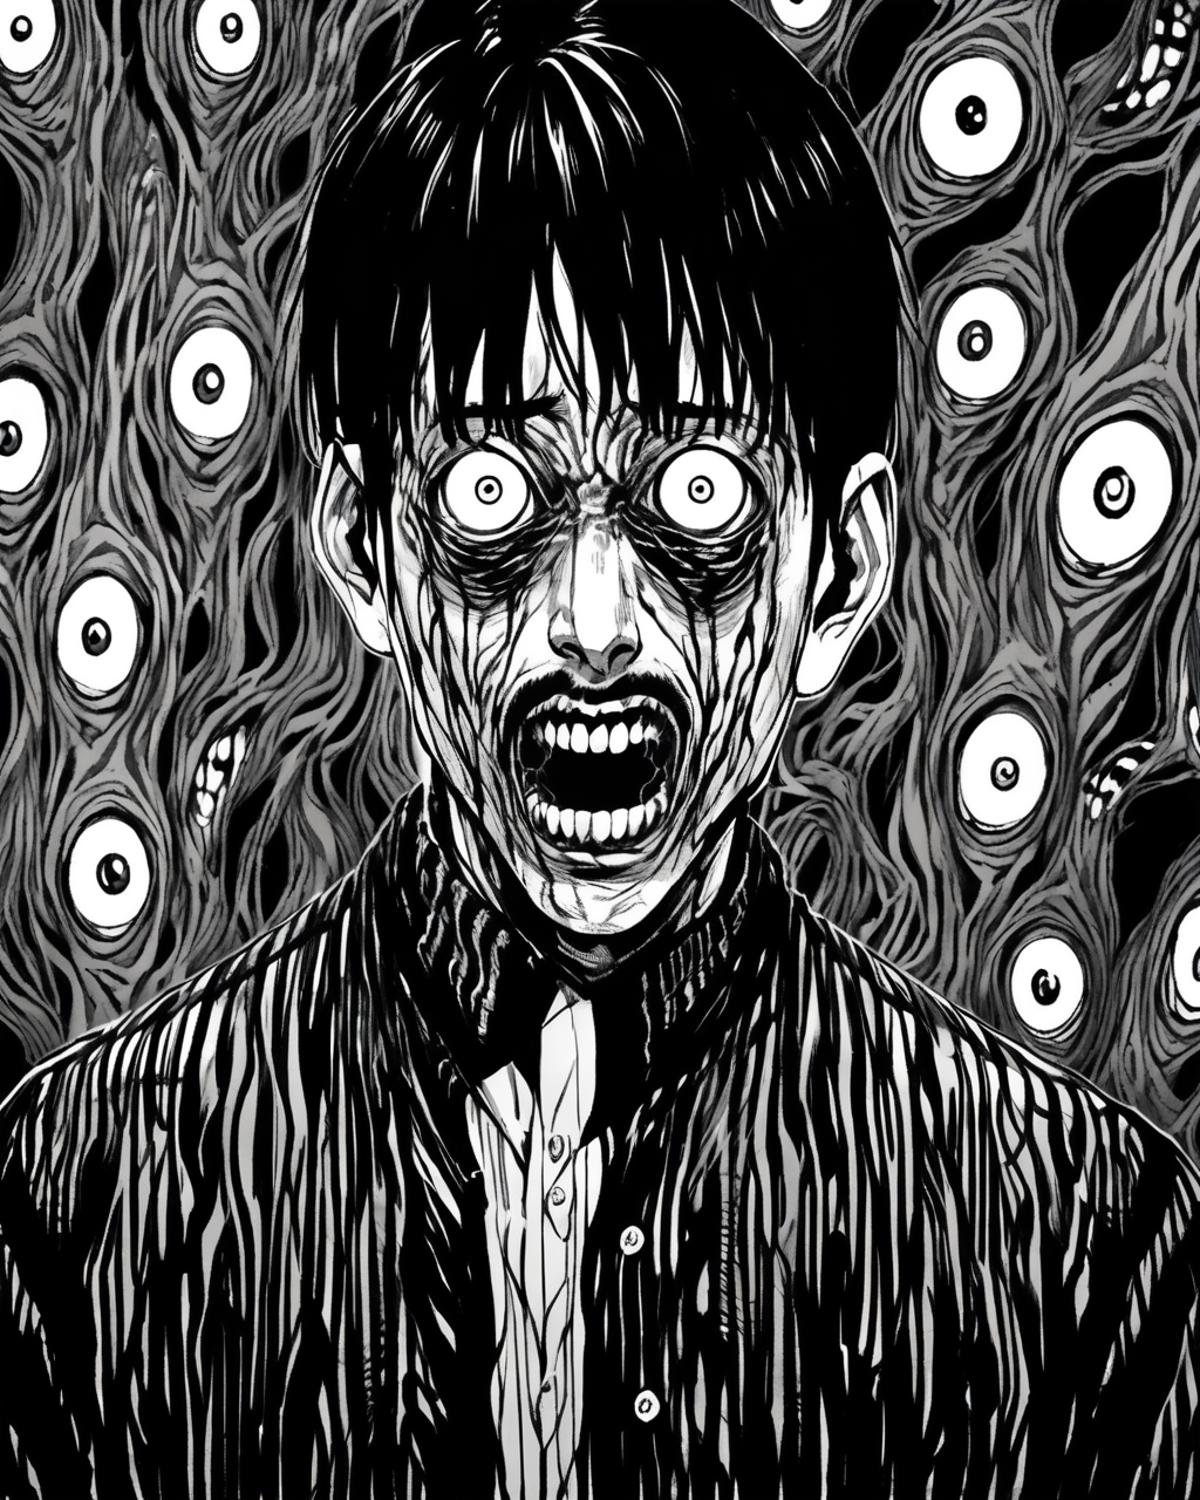 Junji Ito Style {SDXL Now Supported} image by GRxM_